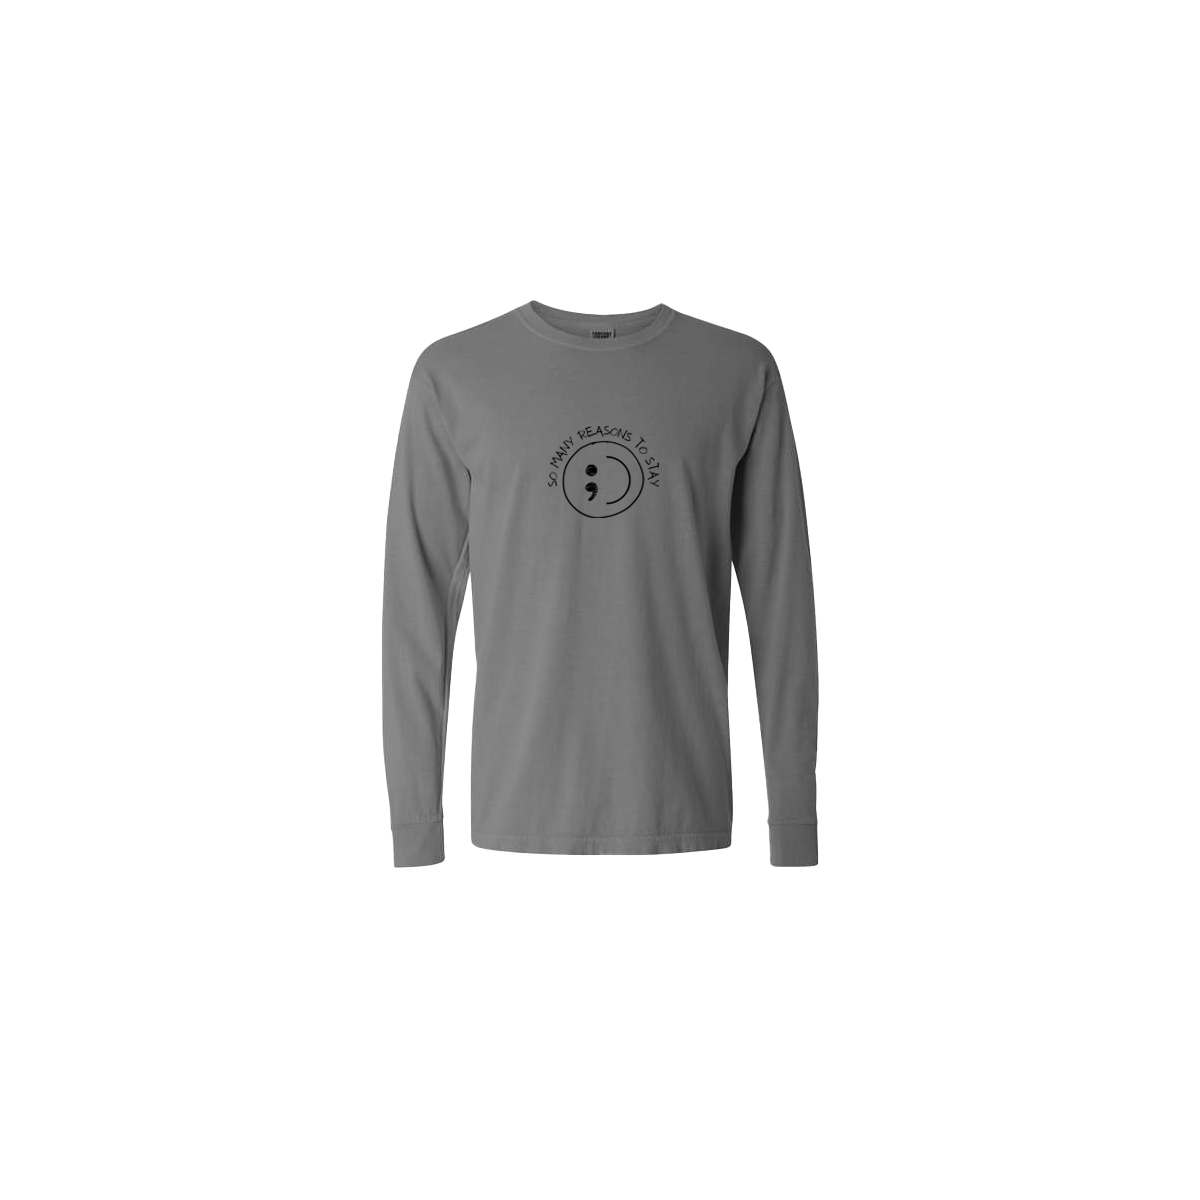 So Many Reasons to Stay Embroidered Grey Long Sleeve Tshirt - Mental Health Awareness Clothing